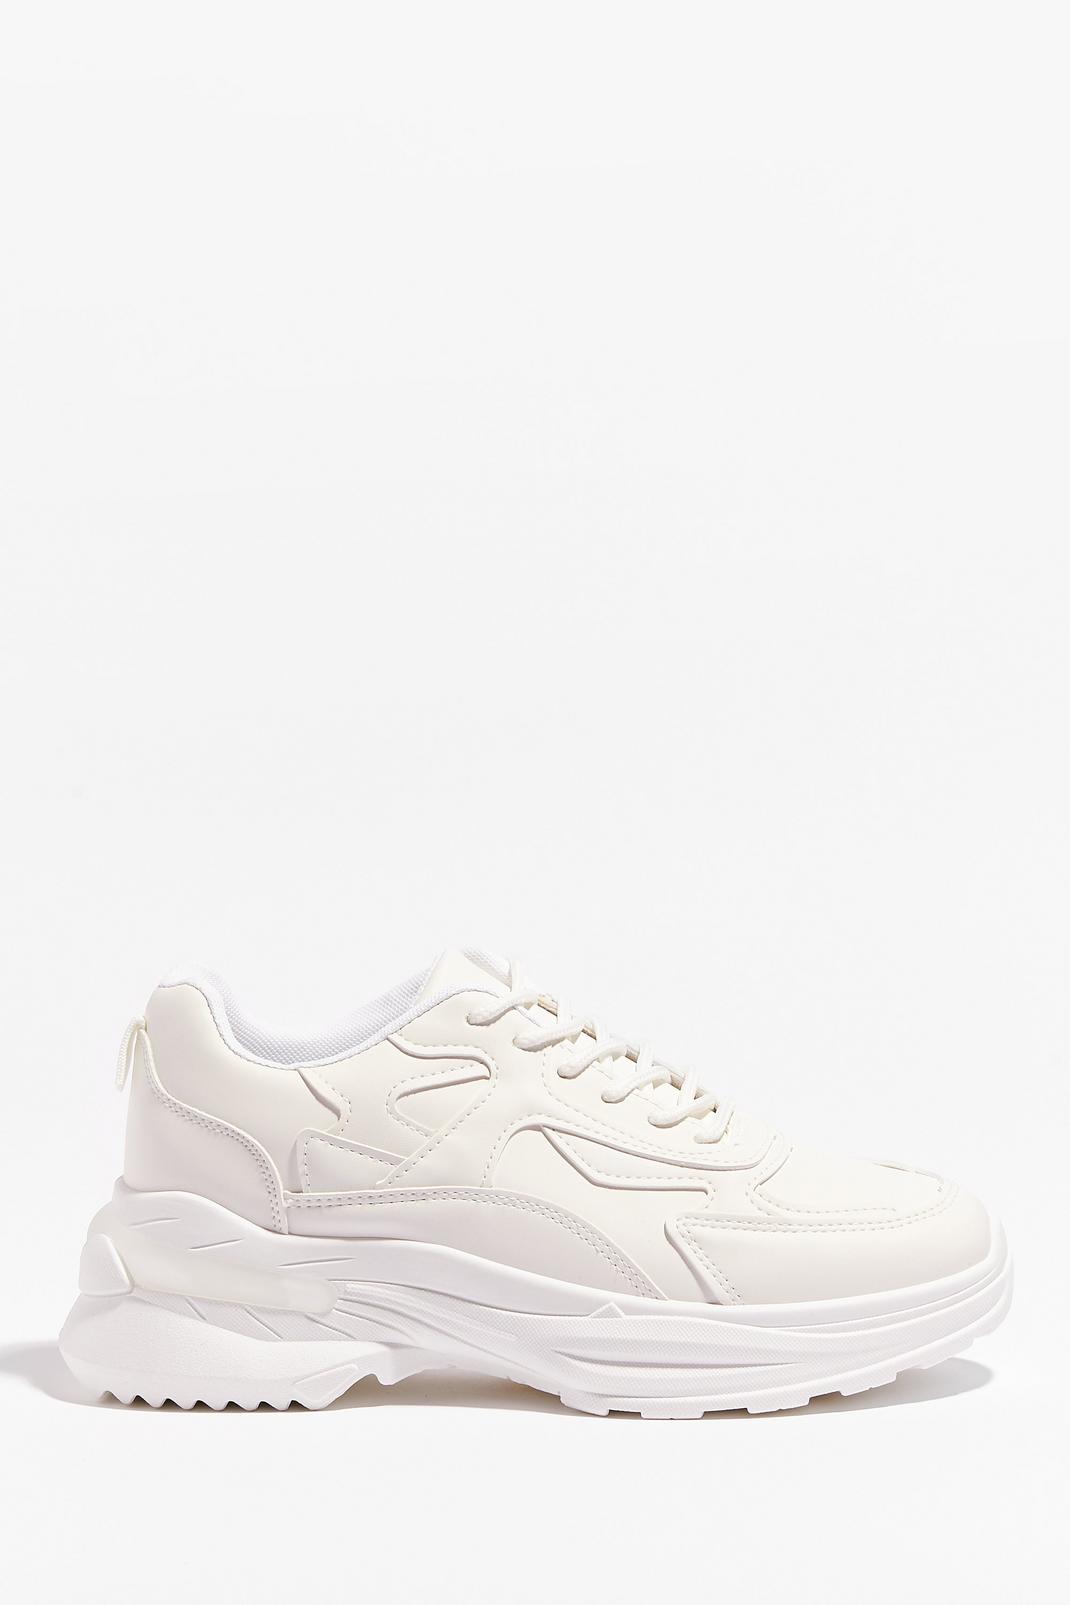 They'll Come Running Faux Leather Chunky Sneakers | Nasty Gal